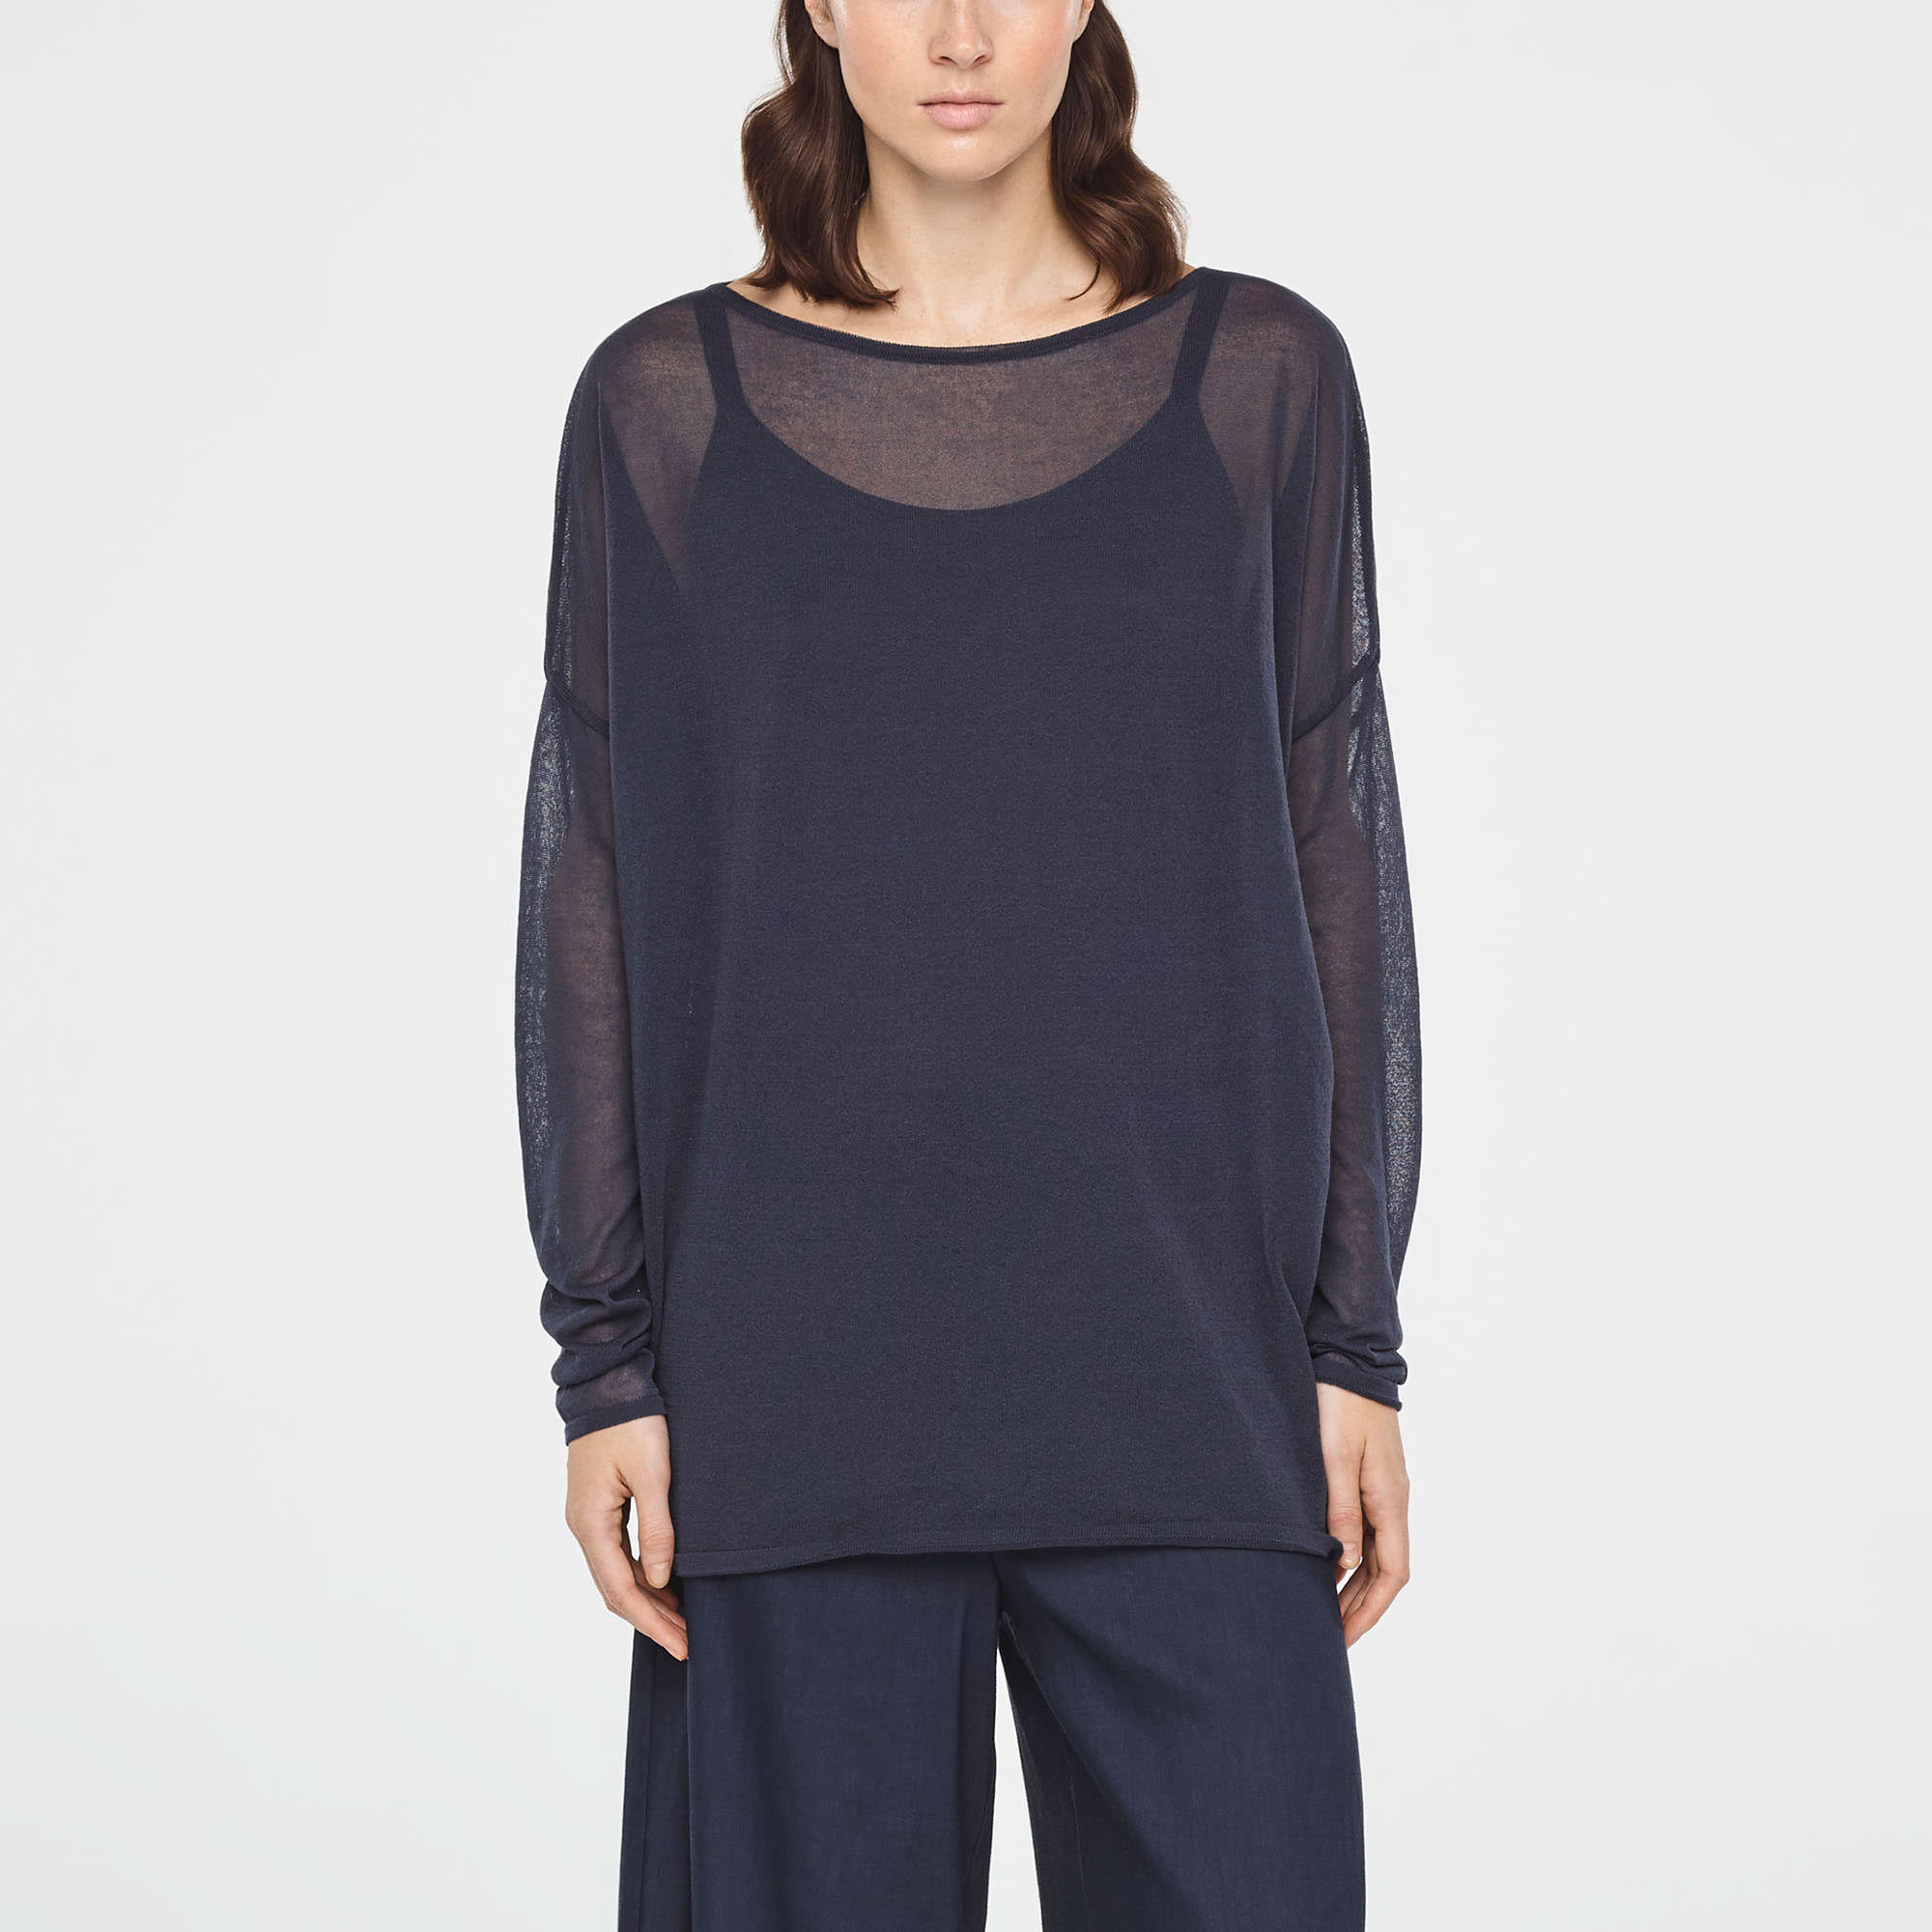 Blue light cotton sweater - full sleeves by Sarah Pacini